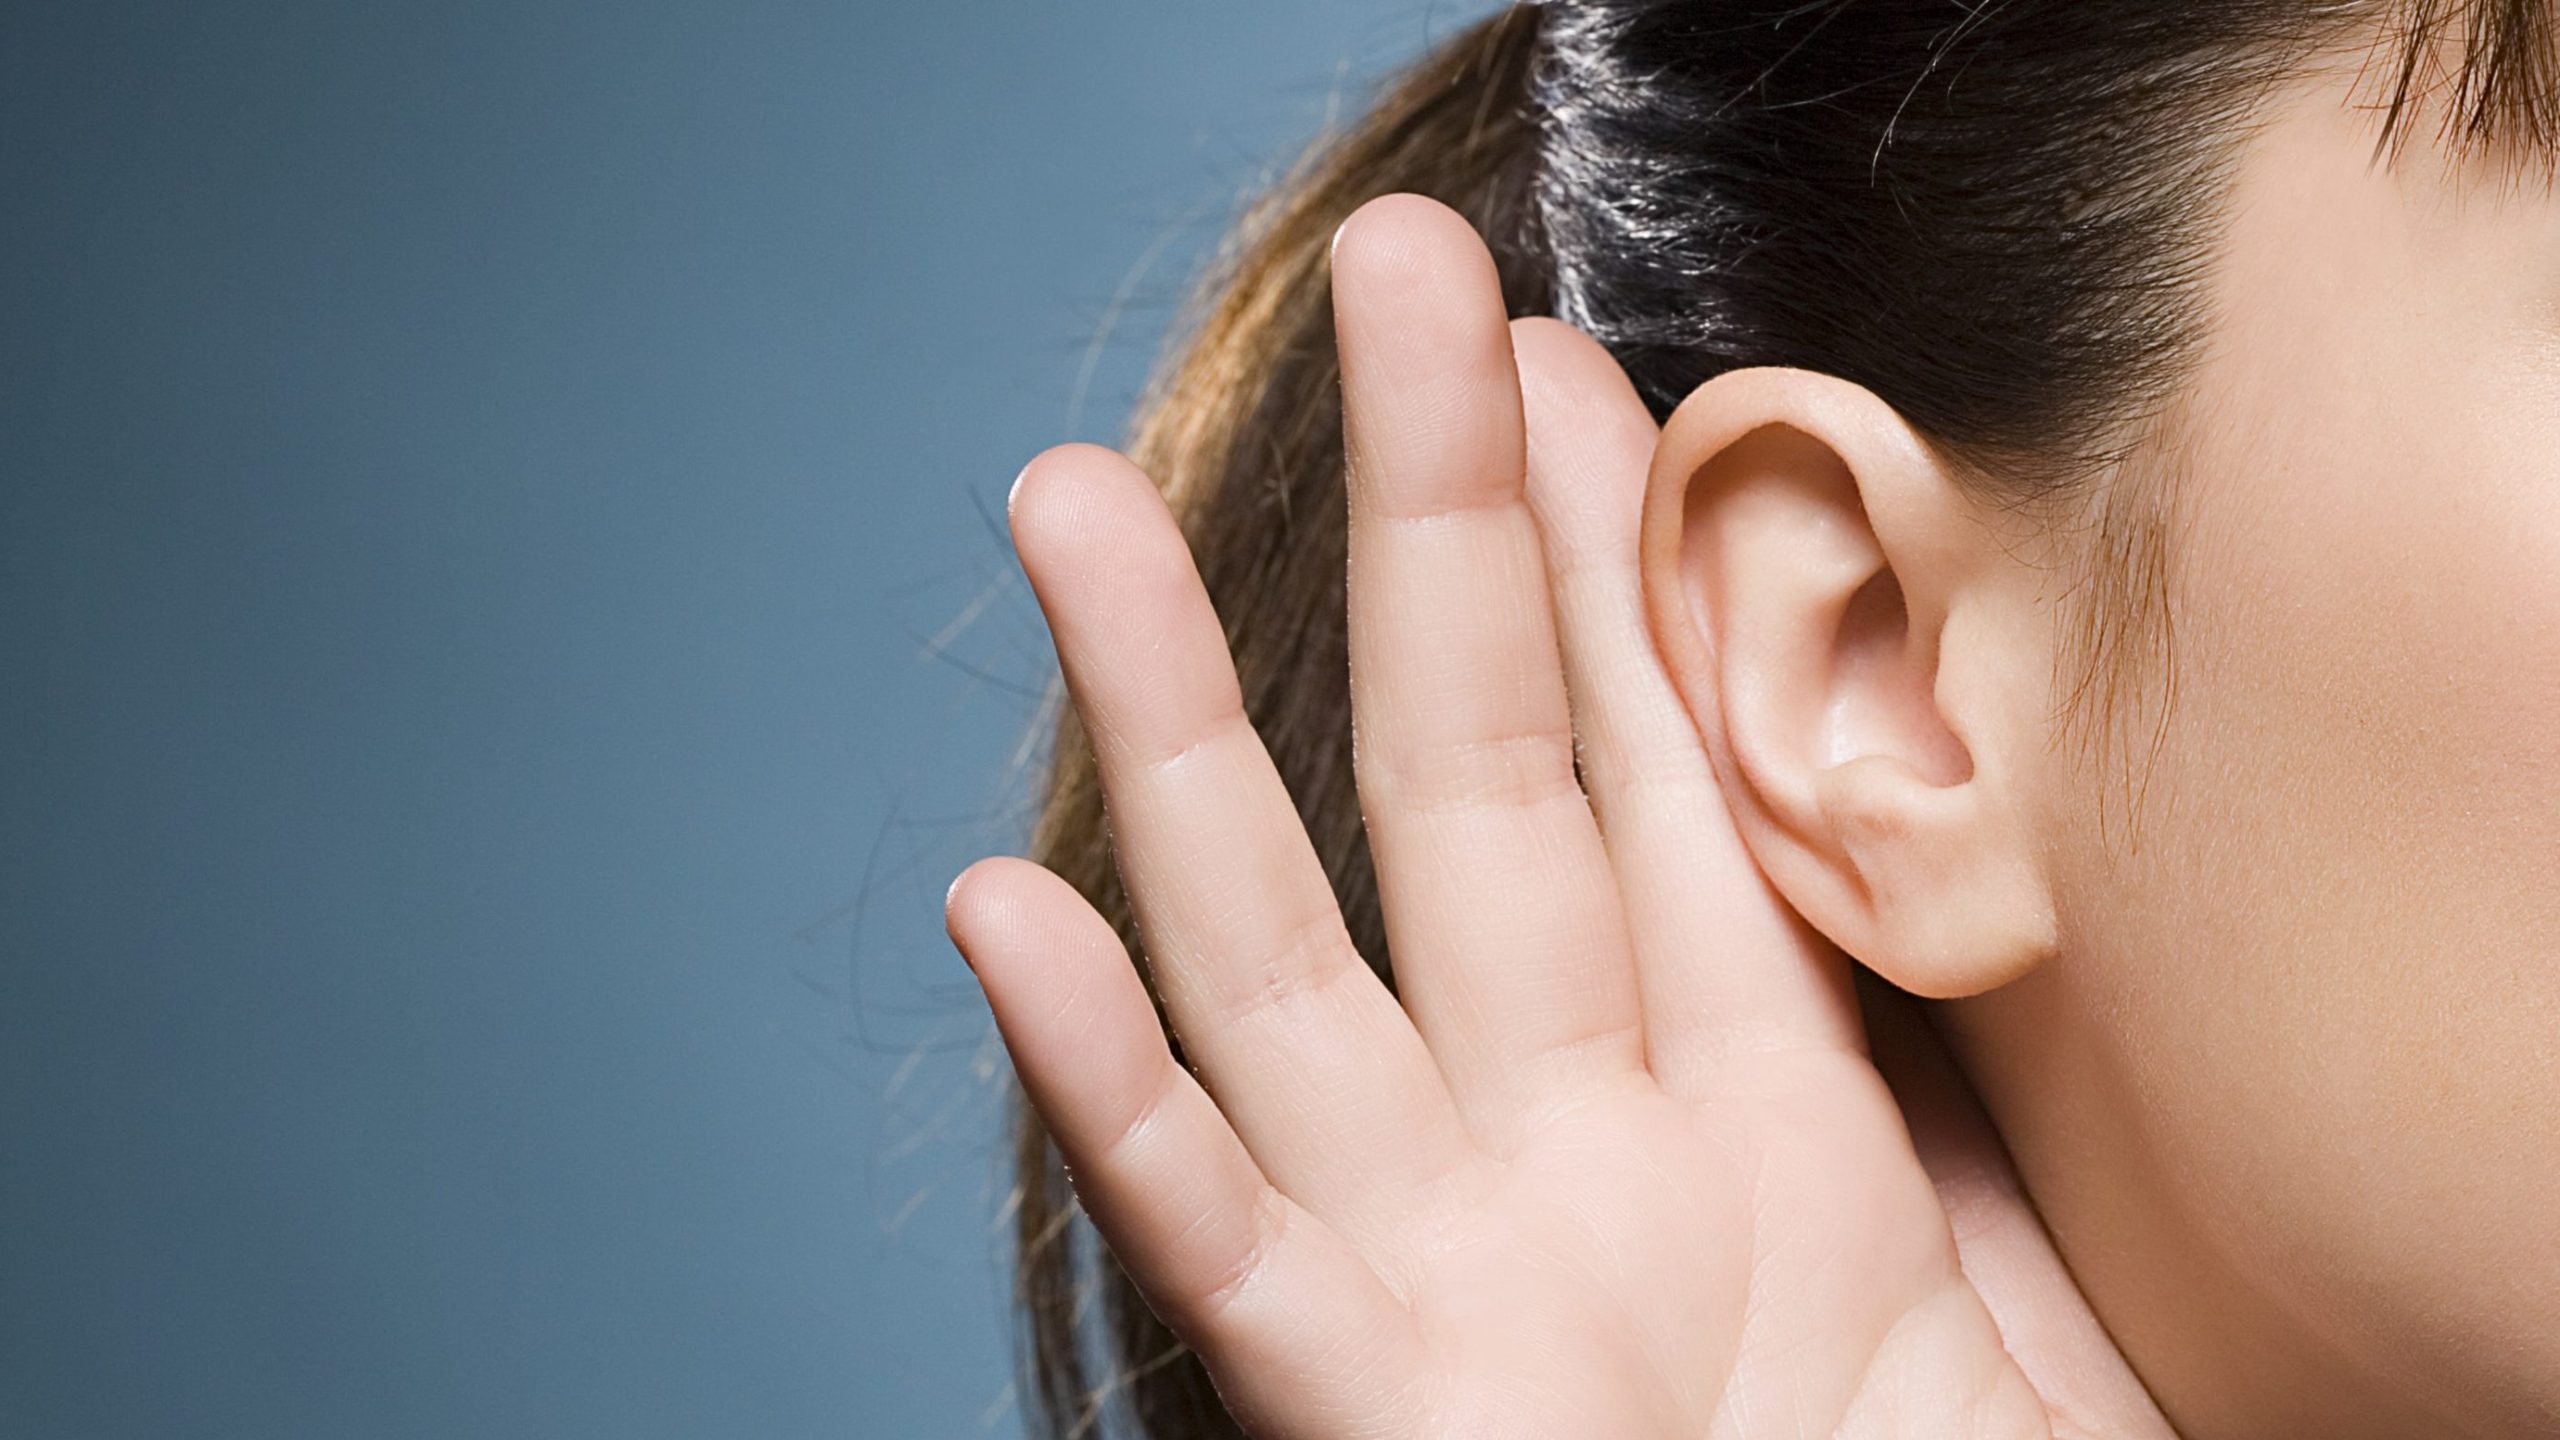 Woman Edly Cannot Hear Men S Voices Due To Rare Hearing